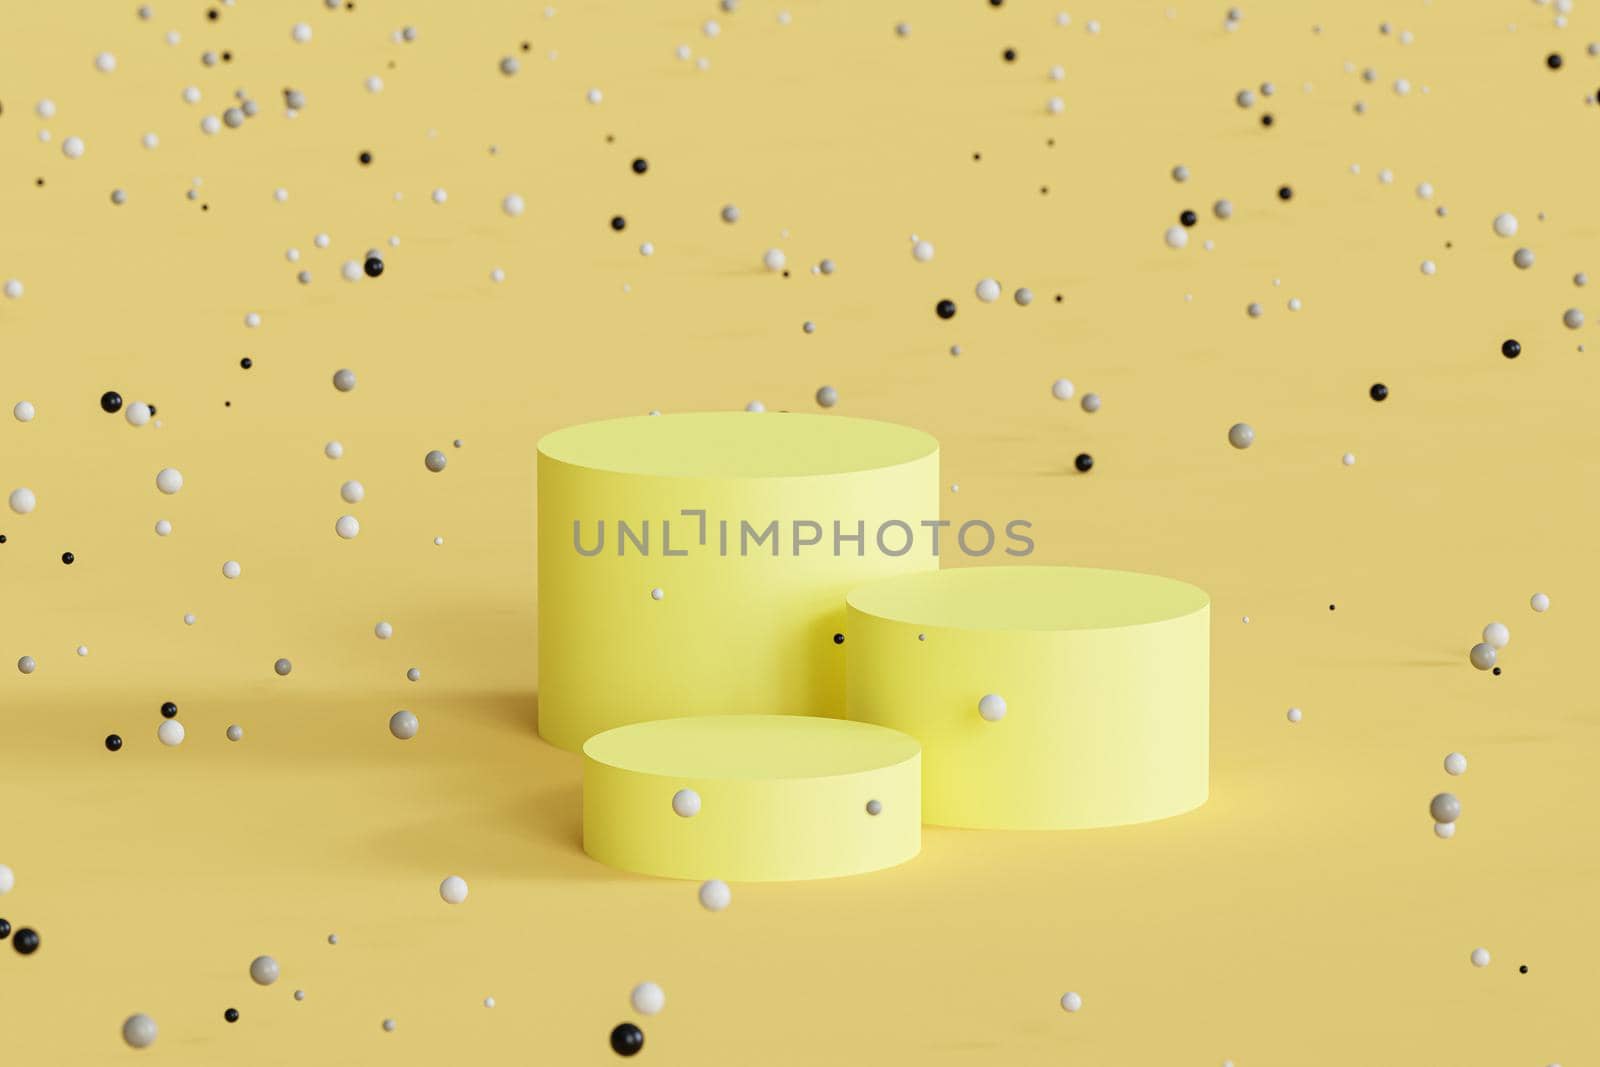 Podiums or pedestals for products display or advertising with shiny spheres on yellow background, 3d minimal render